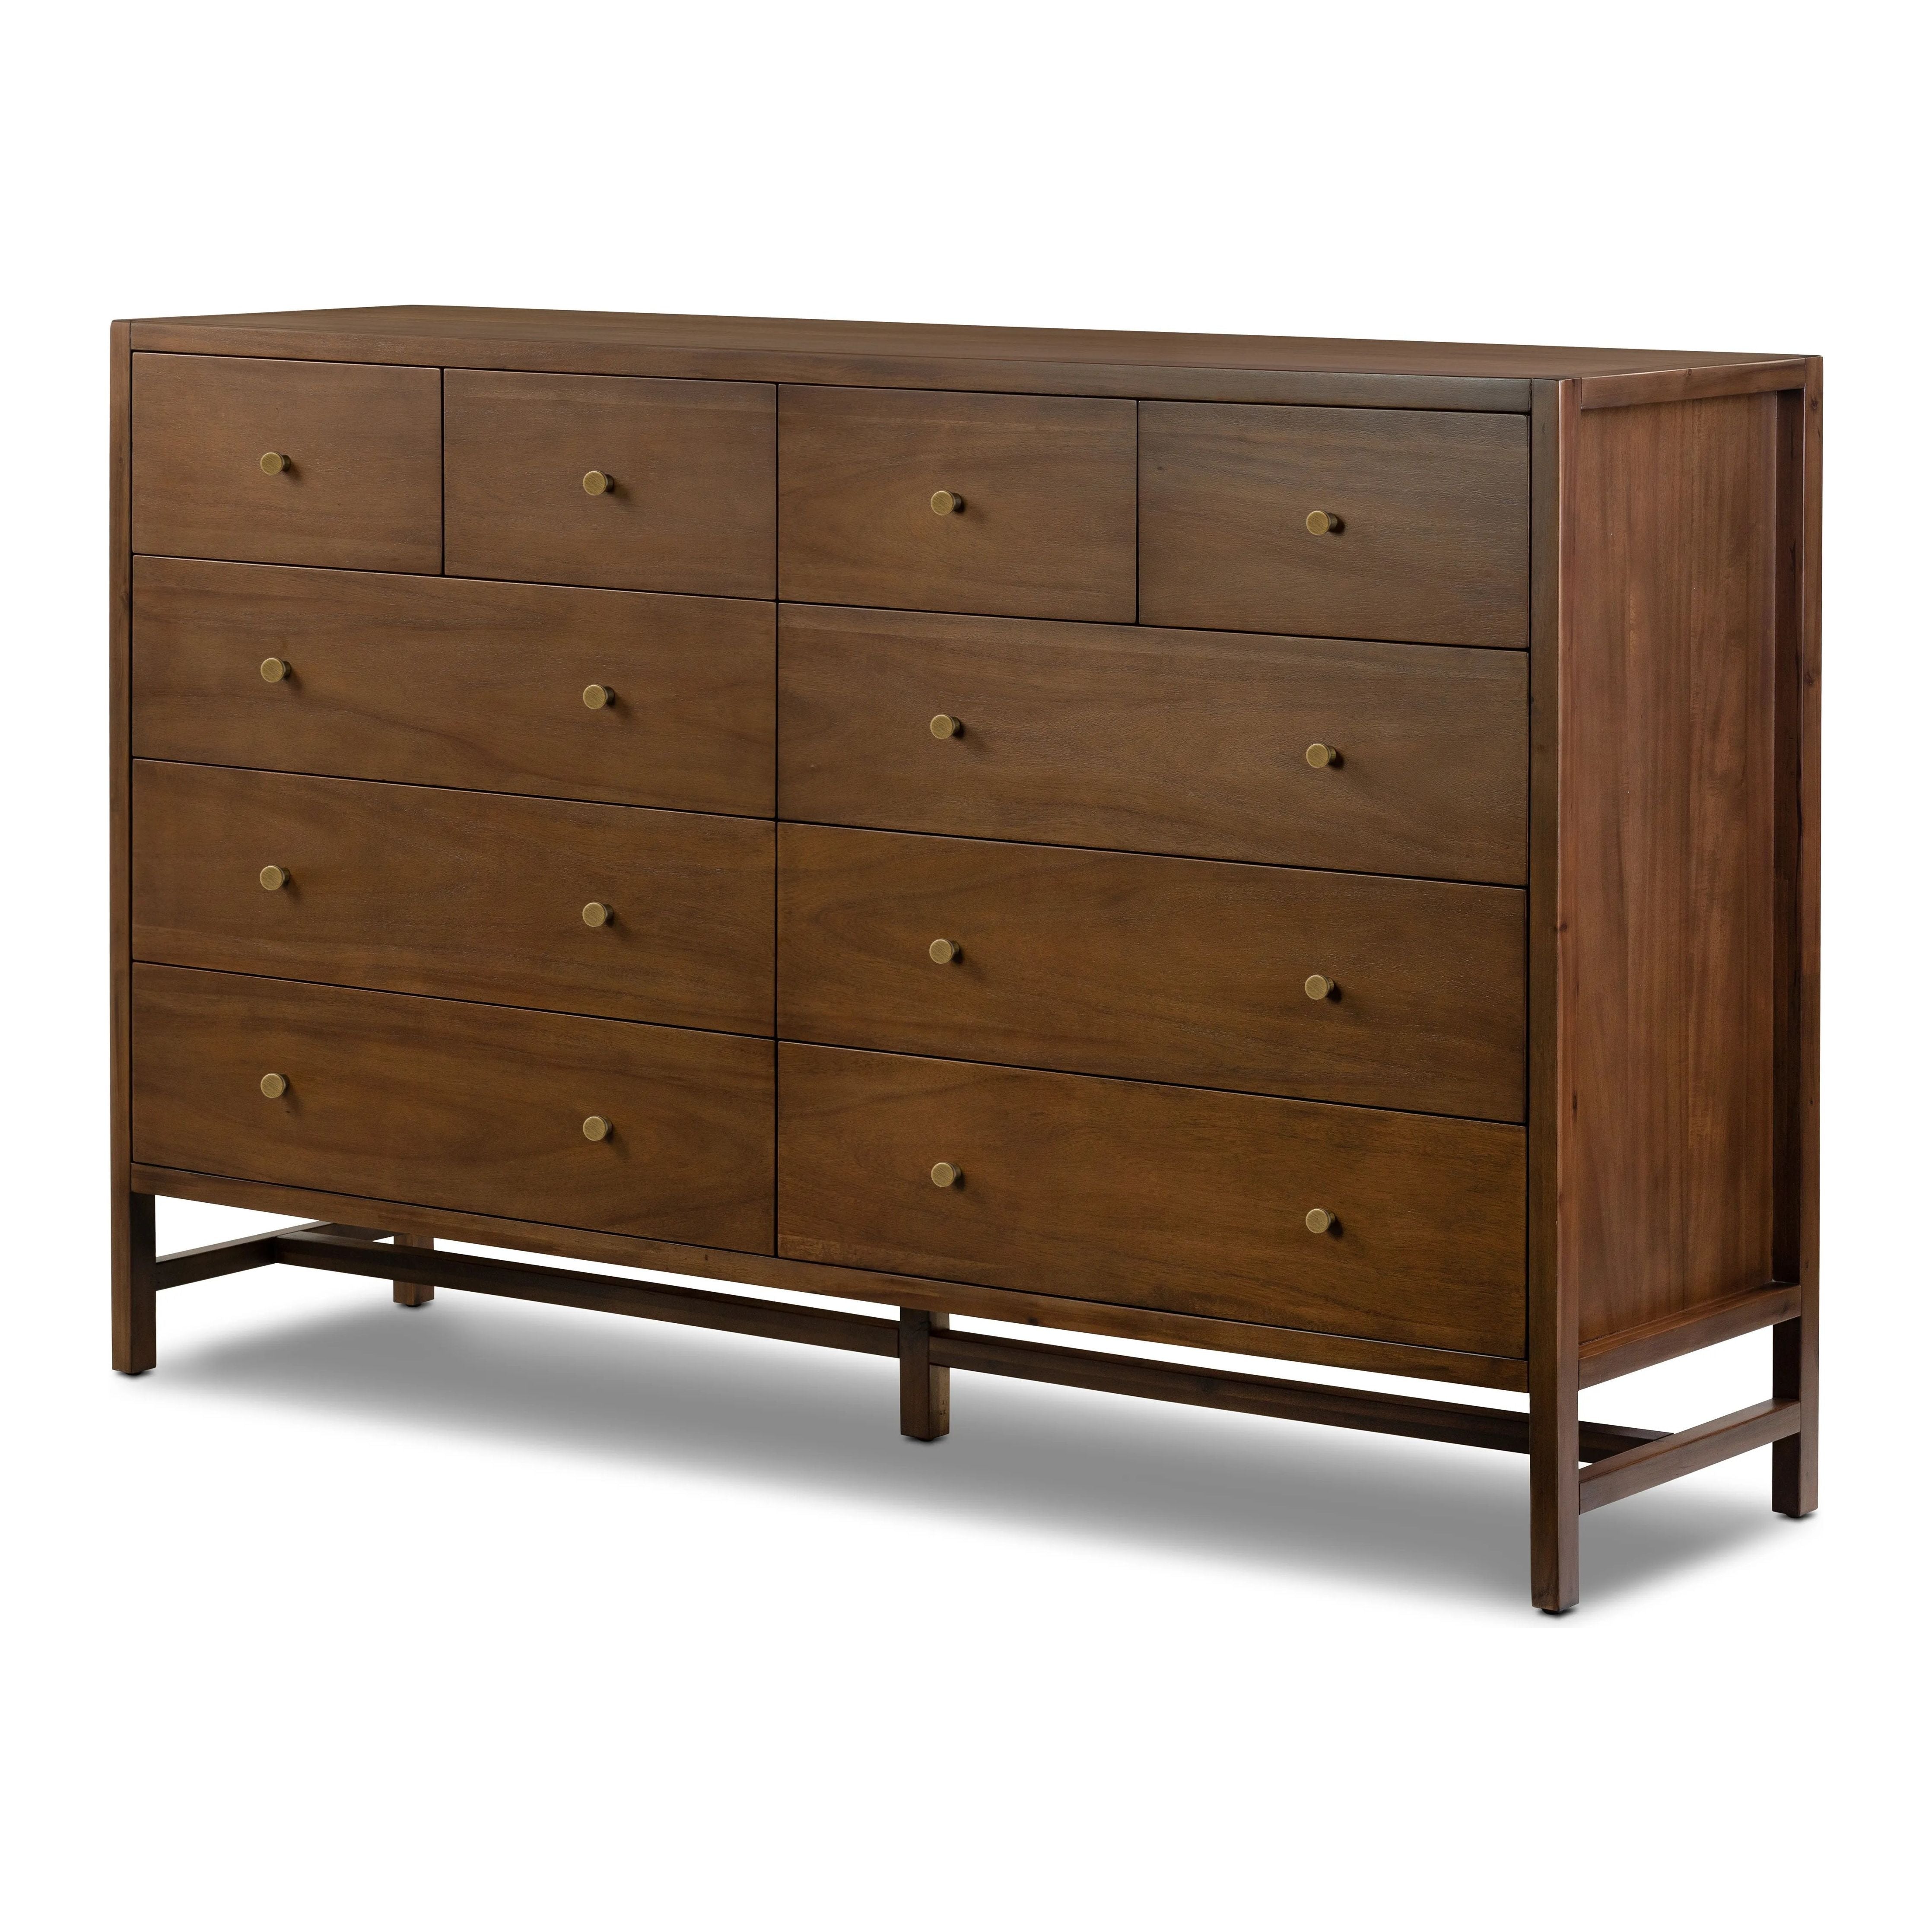 A simple, heavy wood Parsons-style dresser with 10 varied sized drawers for ample storage. Finished in solid ash with brass hardware Amethyst Home provides interior design, new home construction design consulting, vintage area rugs, and lighting in the Washington metro area.